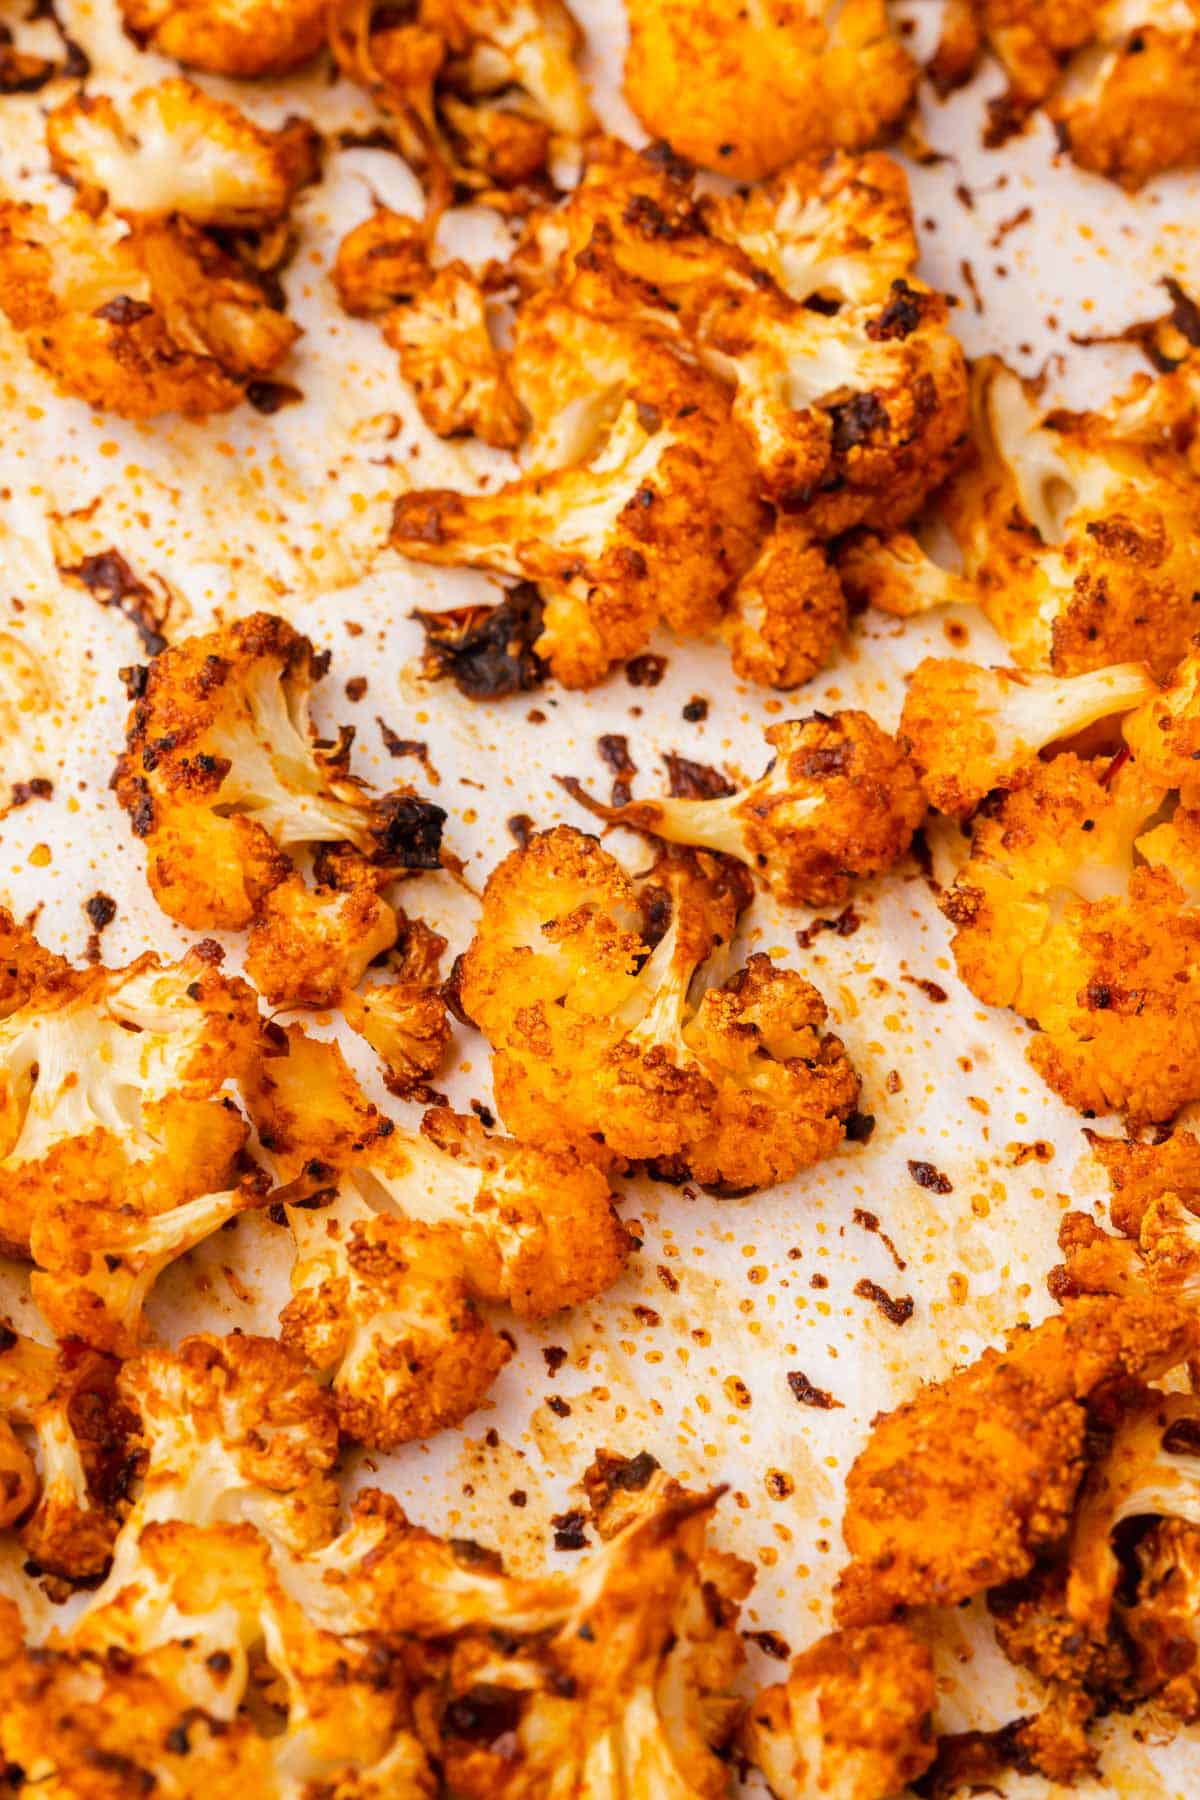 A close up of roasted cauliflower that has been seasoned with taco seasoning, adobo sauce, and chipotle peppers in adobo sauce.